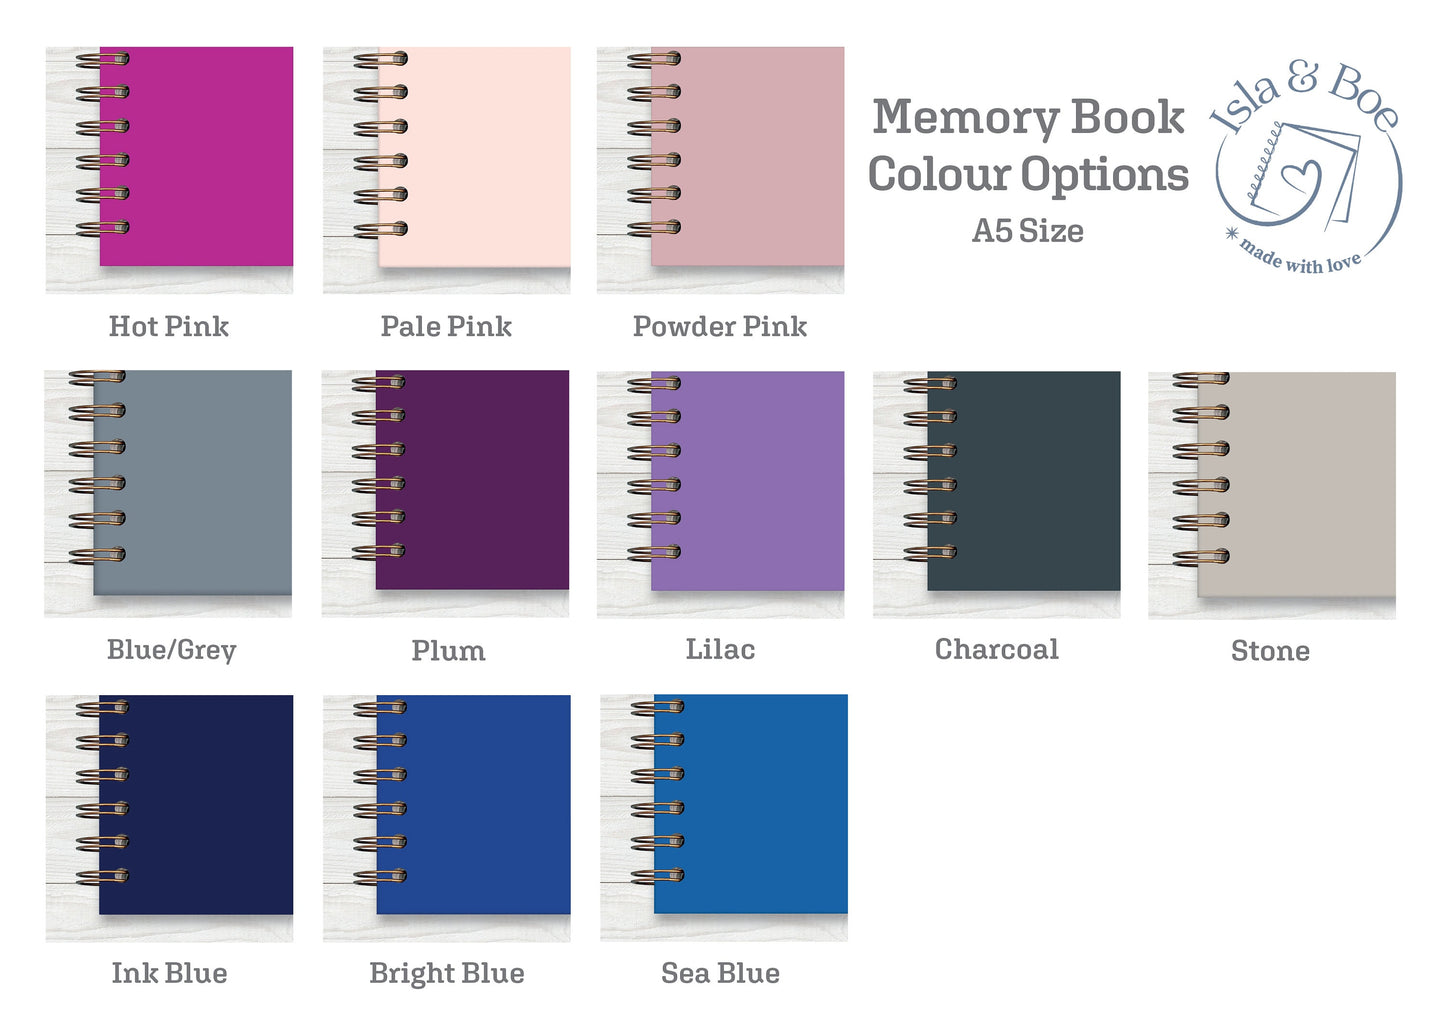 A colour swatch of the memory book colour options. Hot Pink, Pale pink, powder pink, blue/grey, Plum, Lilac, charcoal, stone, sea blue